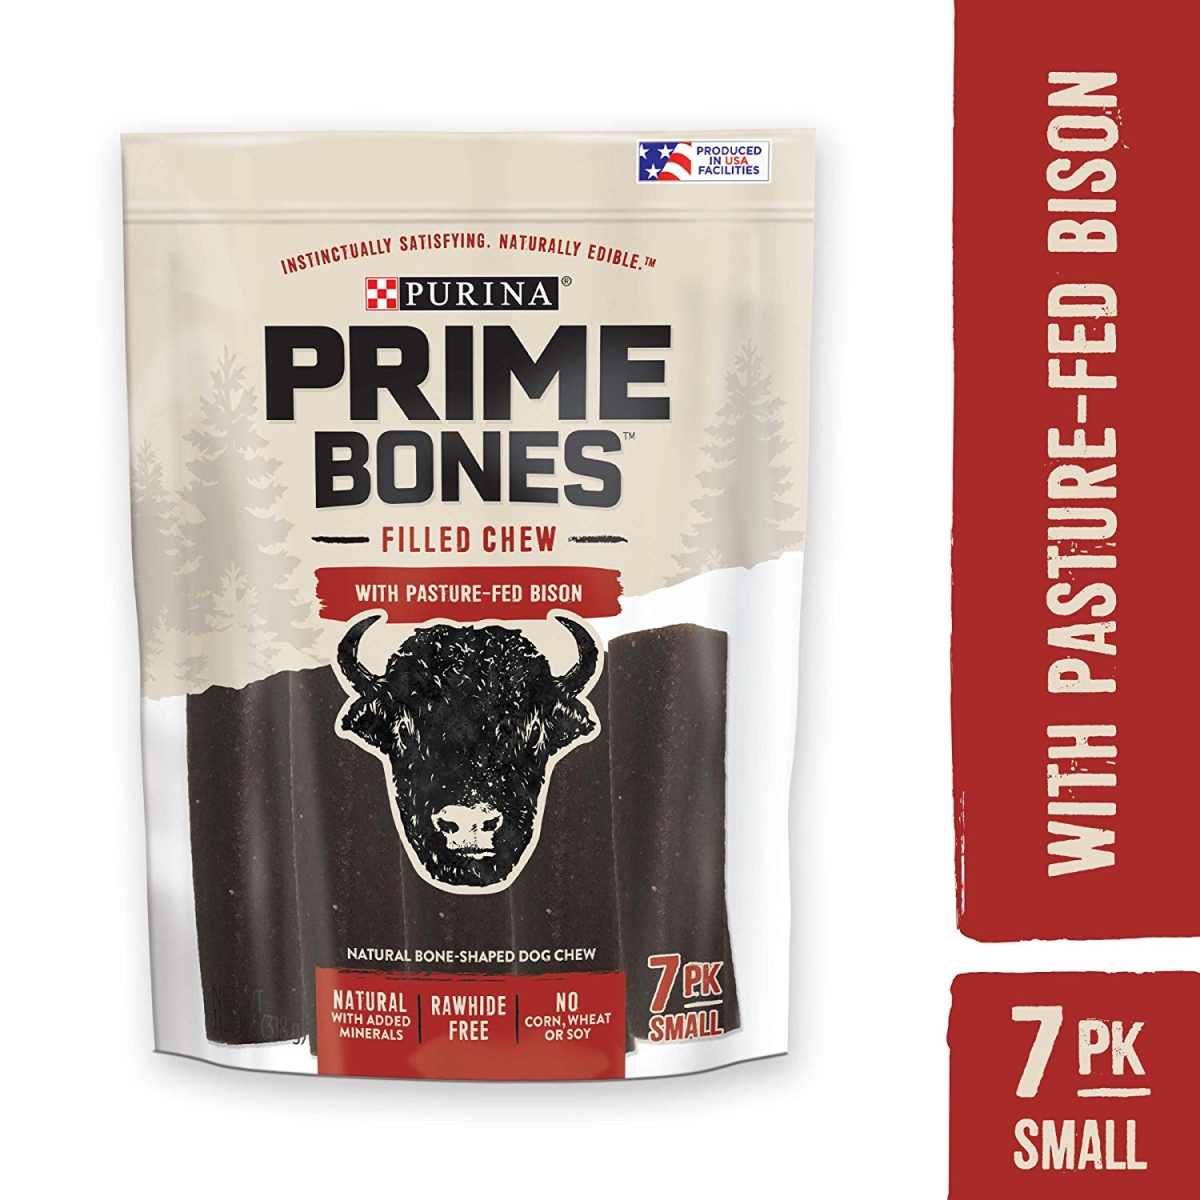 381695 11.2 Oz Prime Bones Bison Filled Chew, Small - Pack Of 6